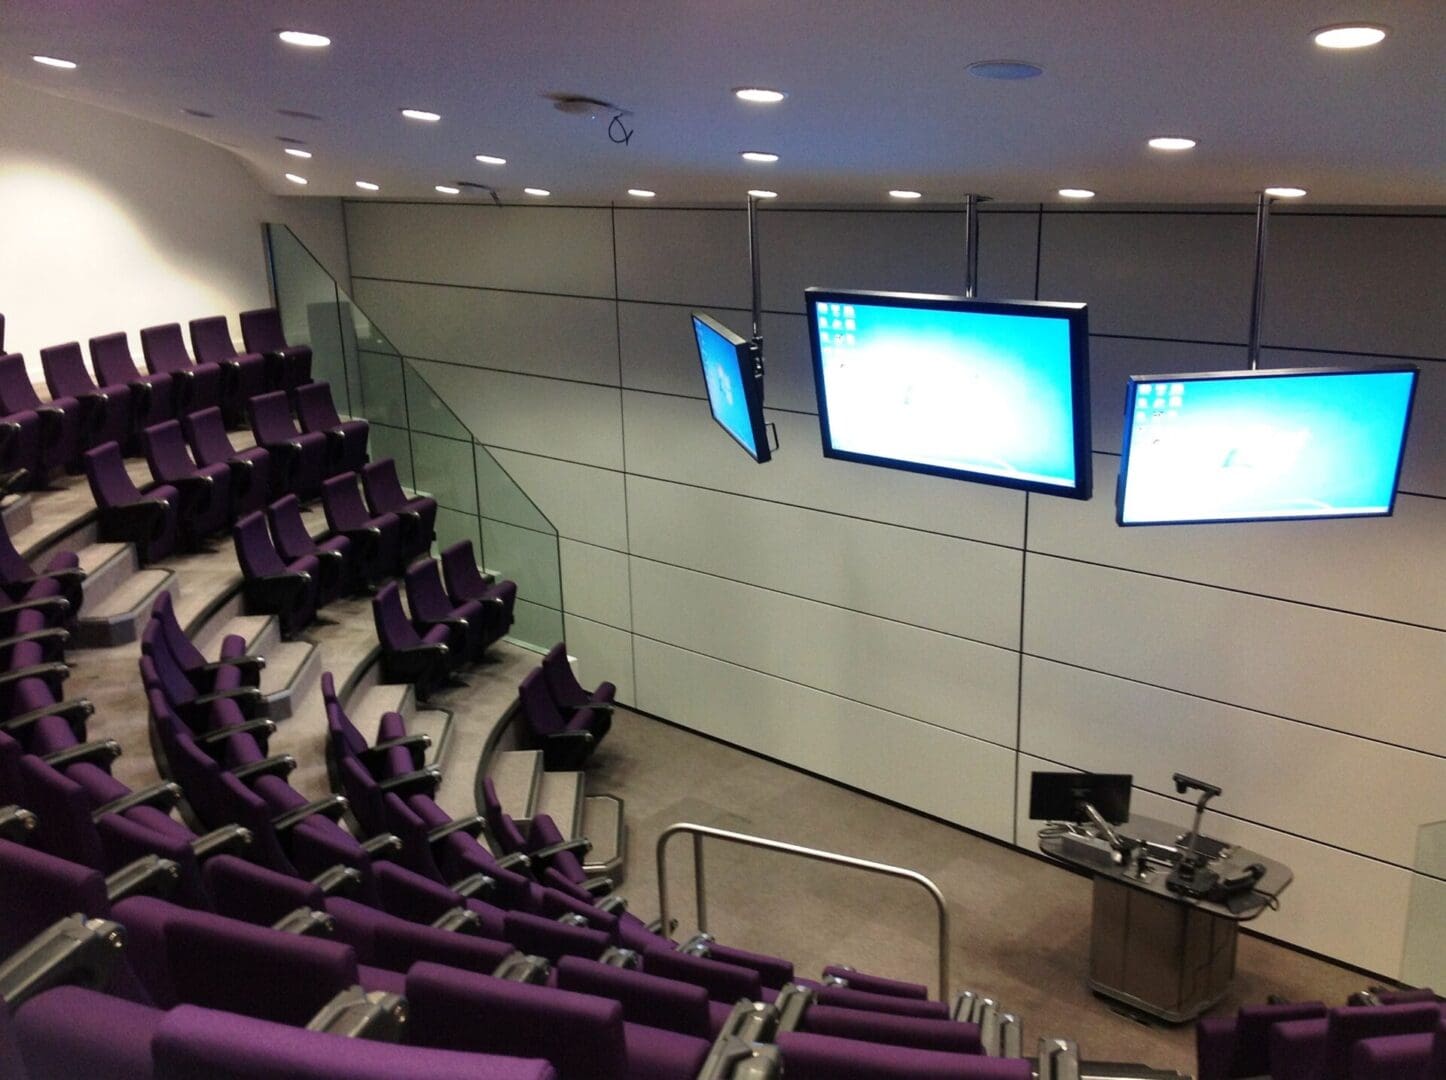 A large room with purple chairs and two big screens